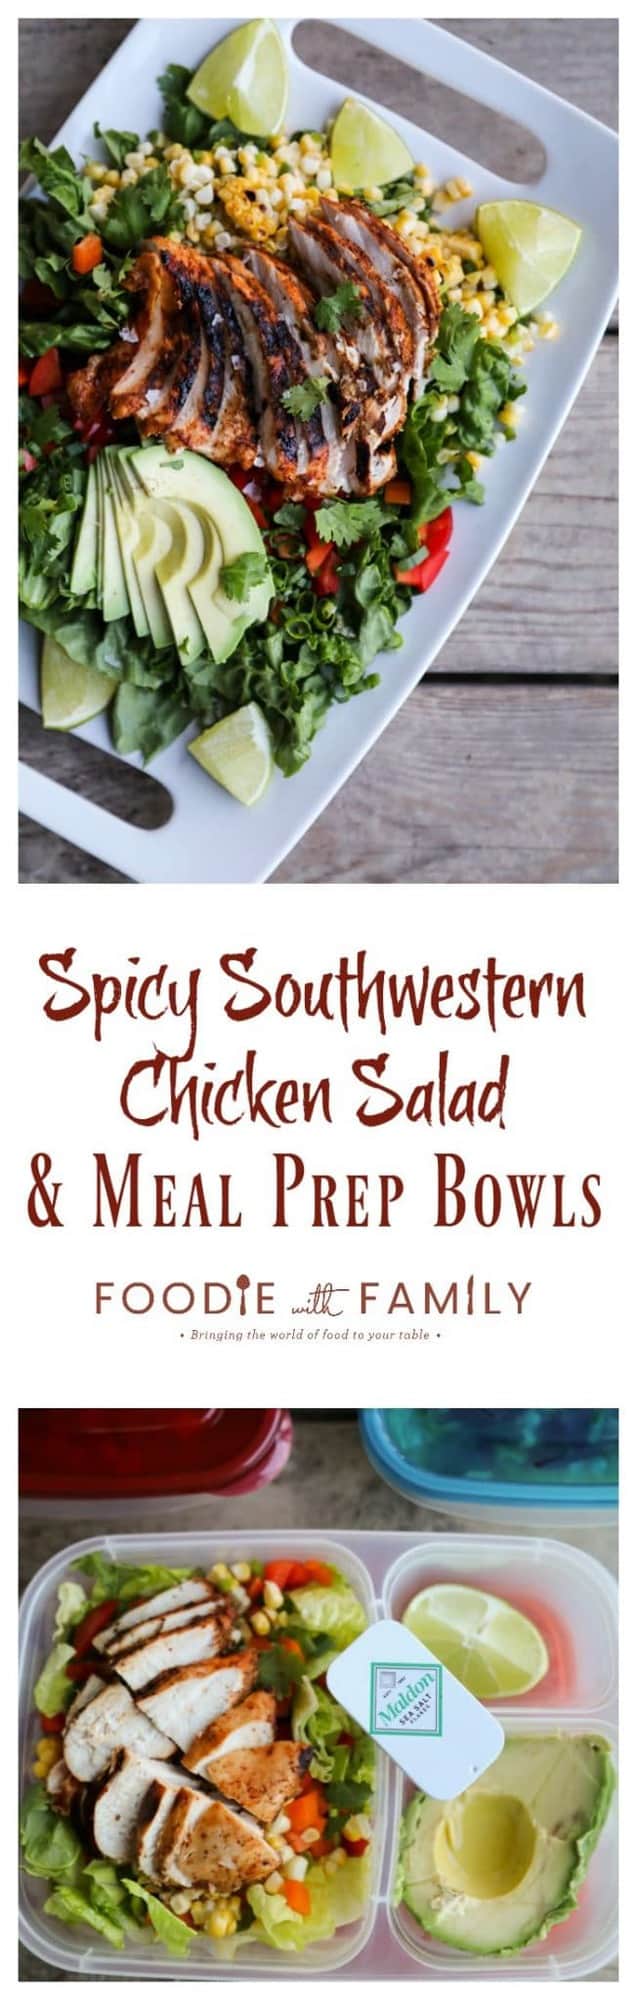 https://www.foodiewithfamily.com/wp-content/uploads/3000/04/Spicy-Southwestern-Chicken-Salad-Meal-Prep-Bowls.jpg